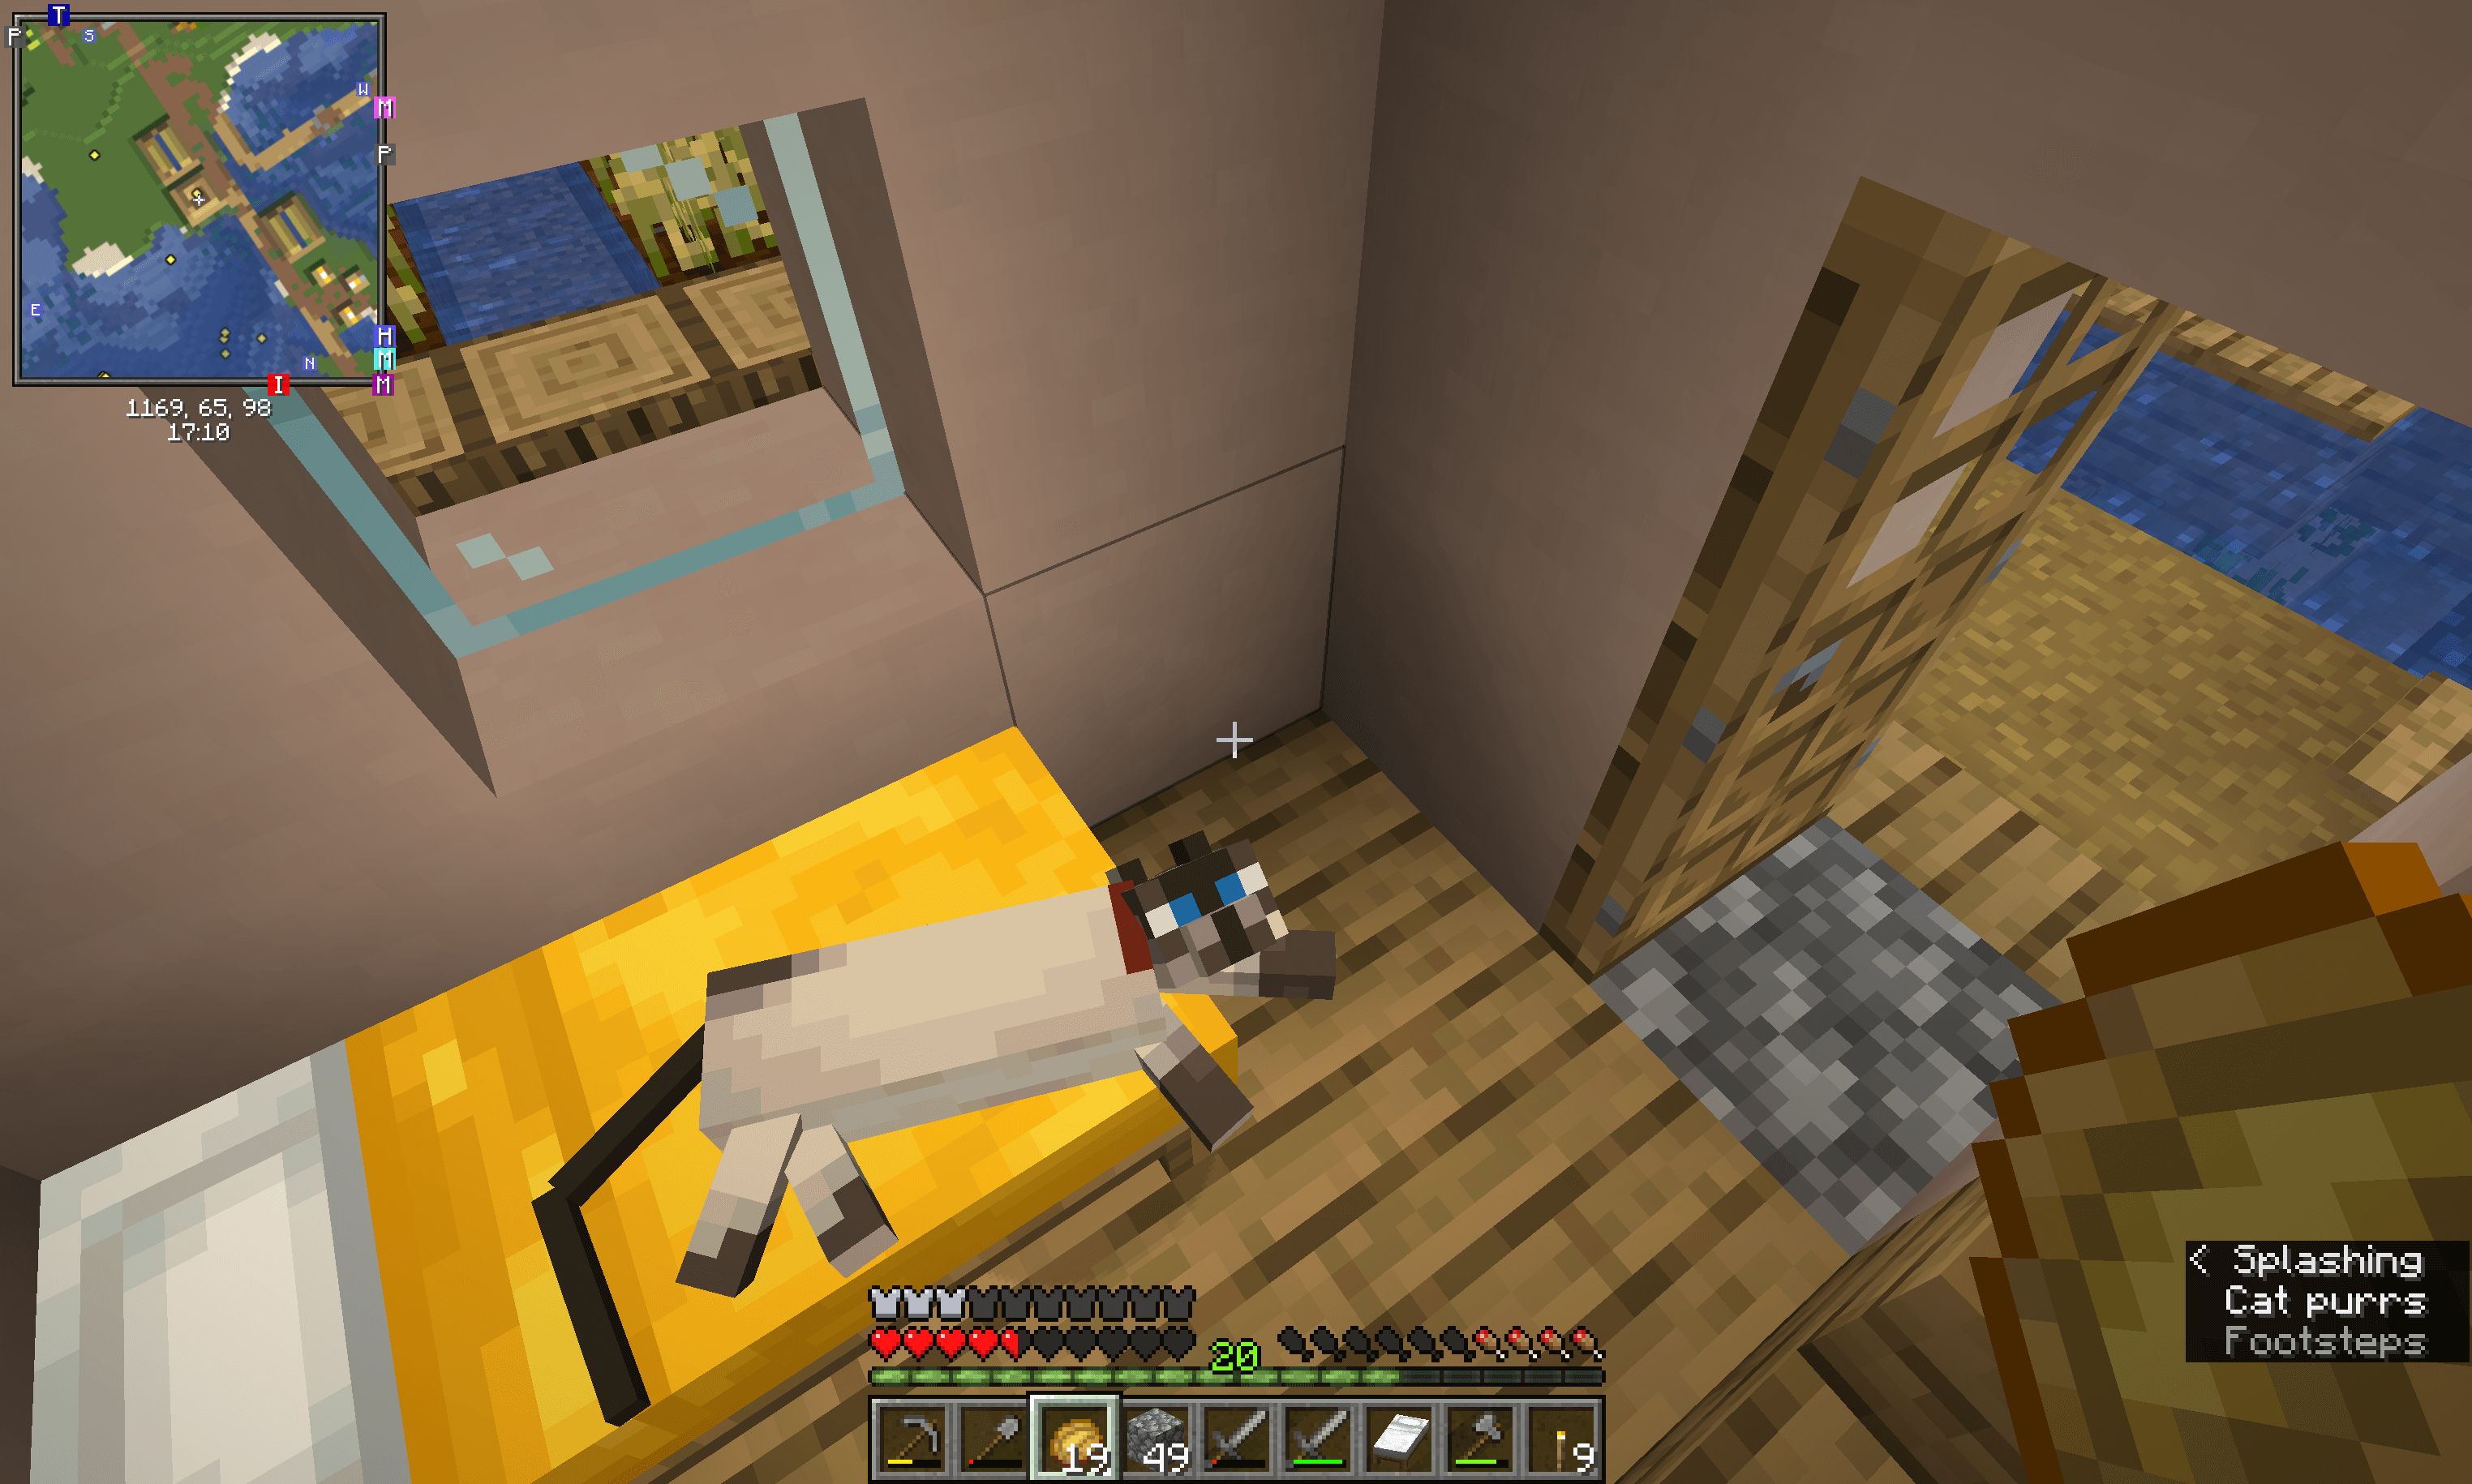 Minecraft screenshot of a cat lounging on a bed.